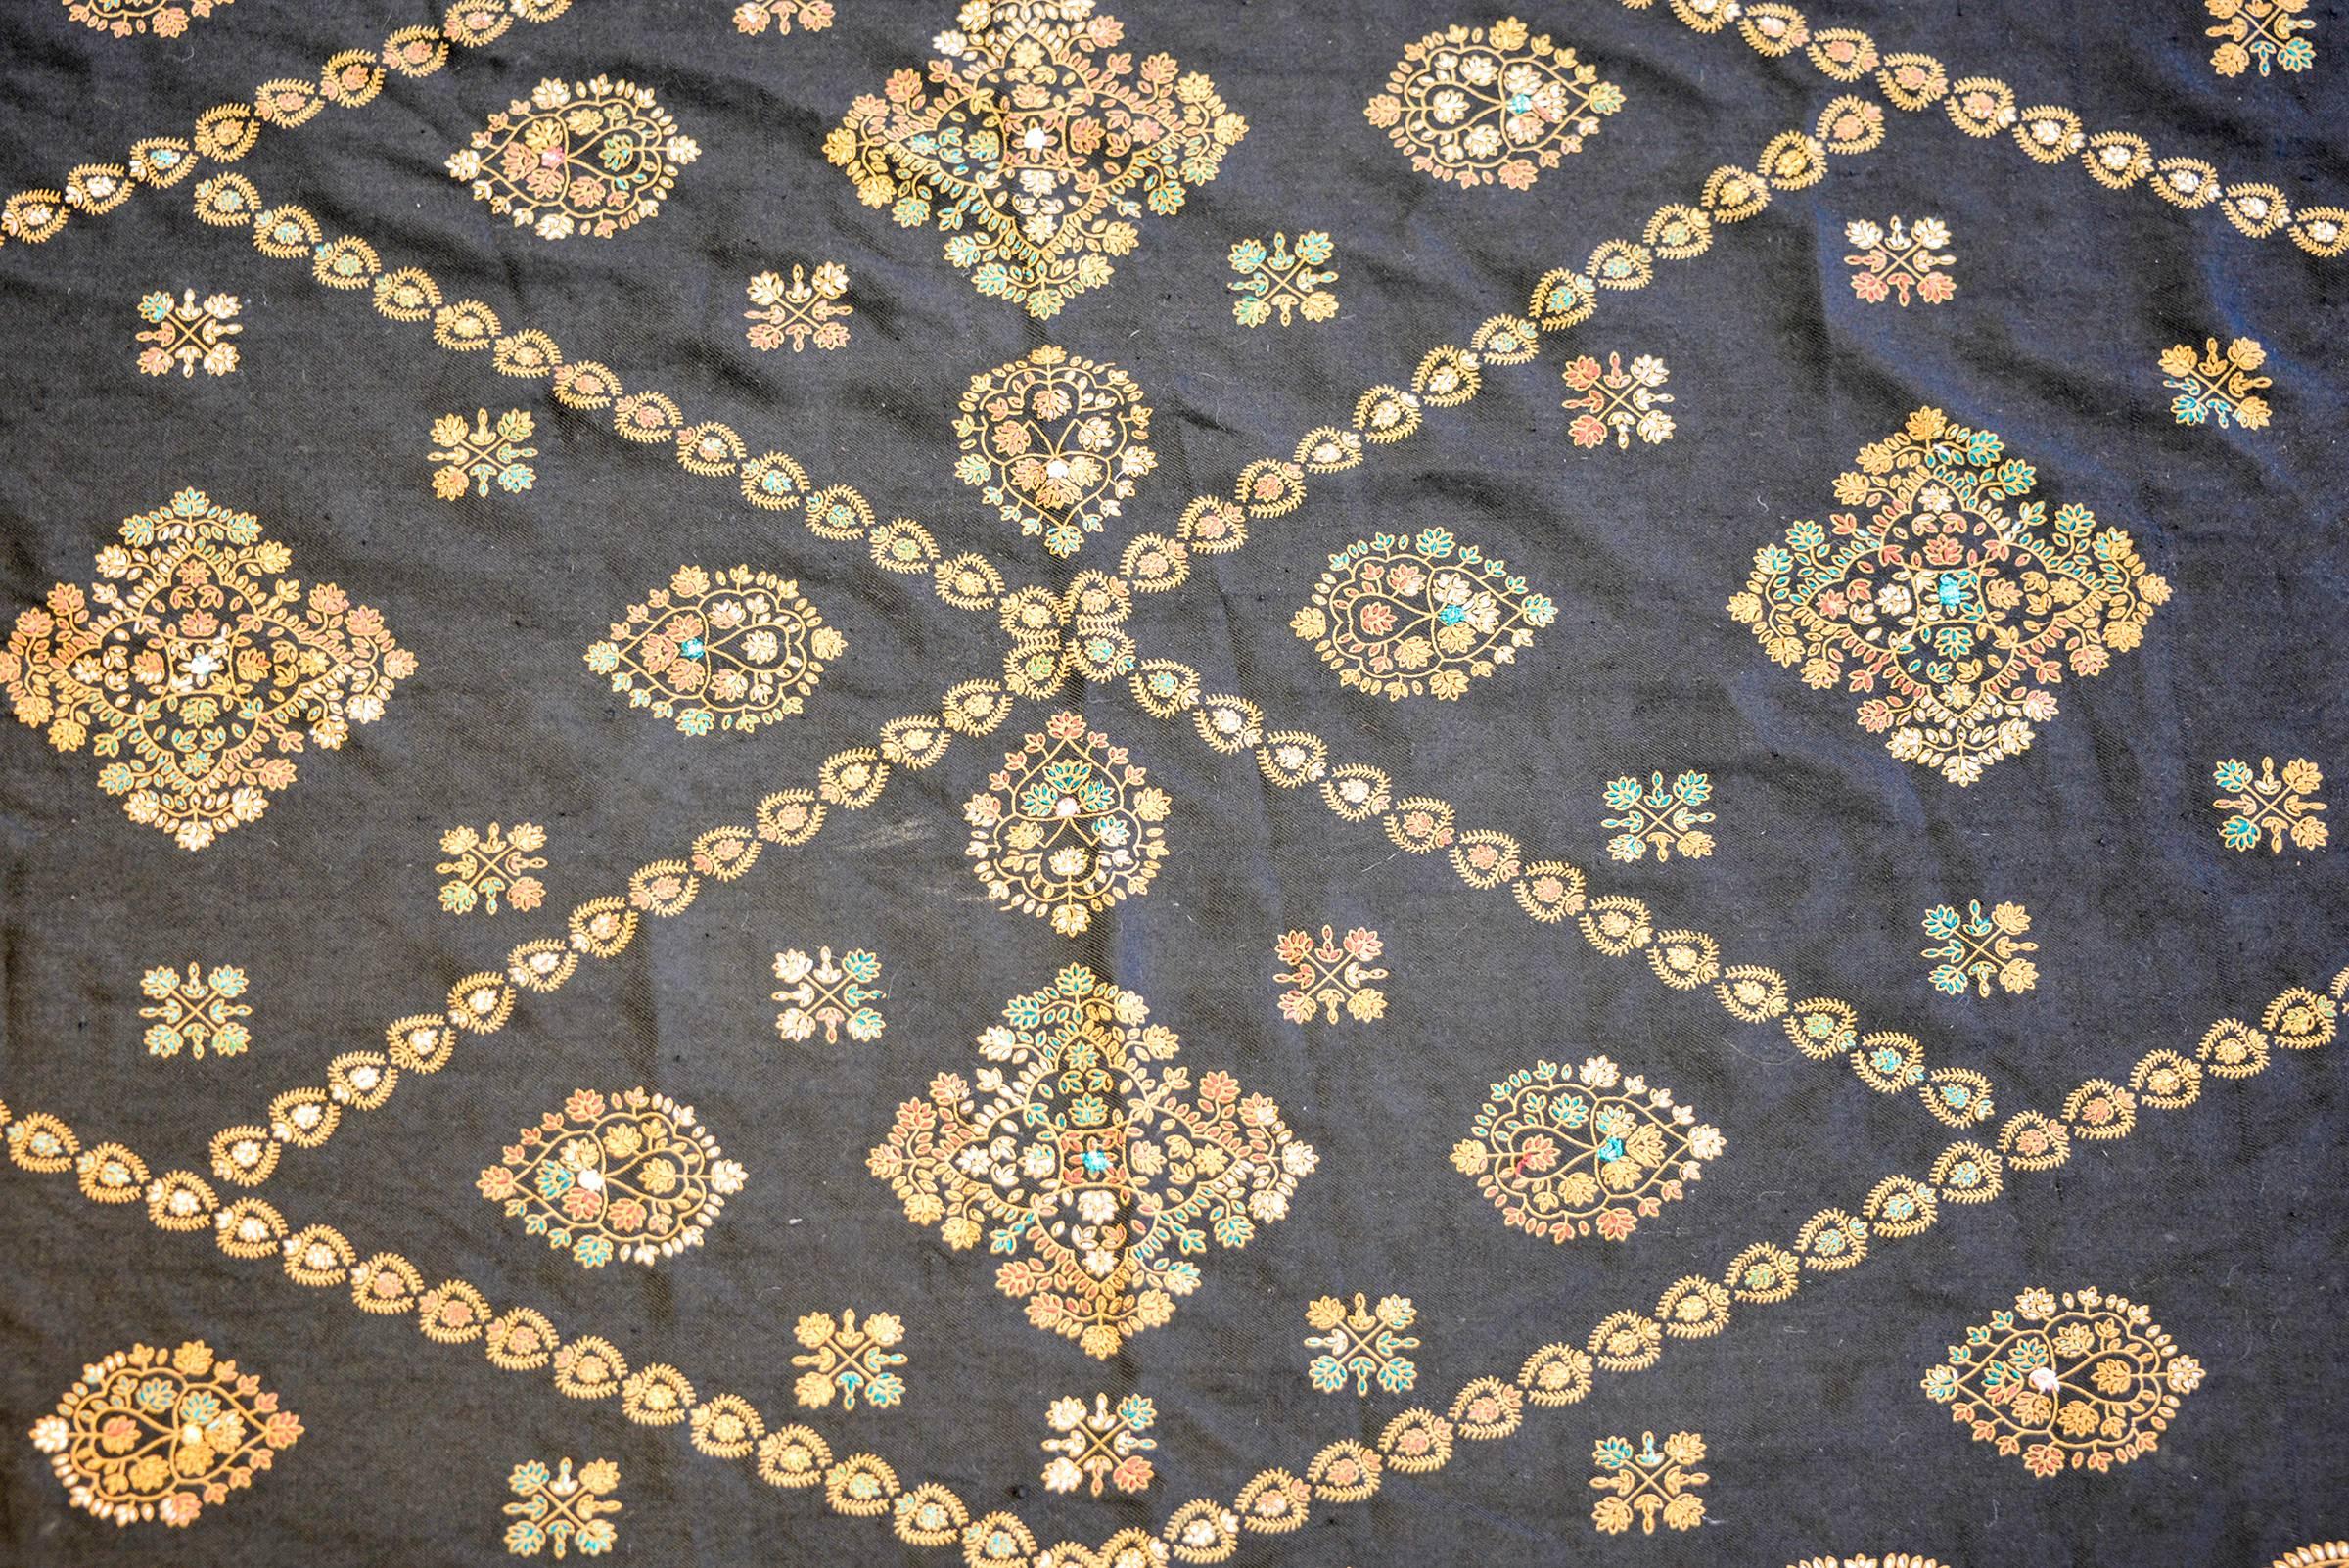 Skillfully Embroidered Late 20th Century Indian Suzani Textile In Good Condition For Sale In Chicago, IL